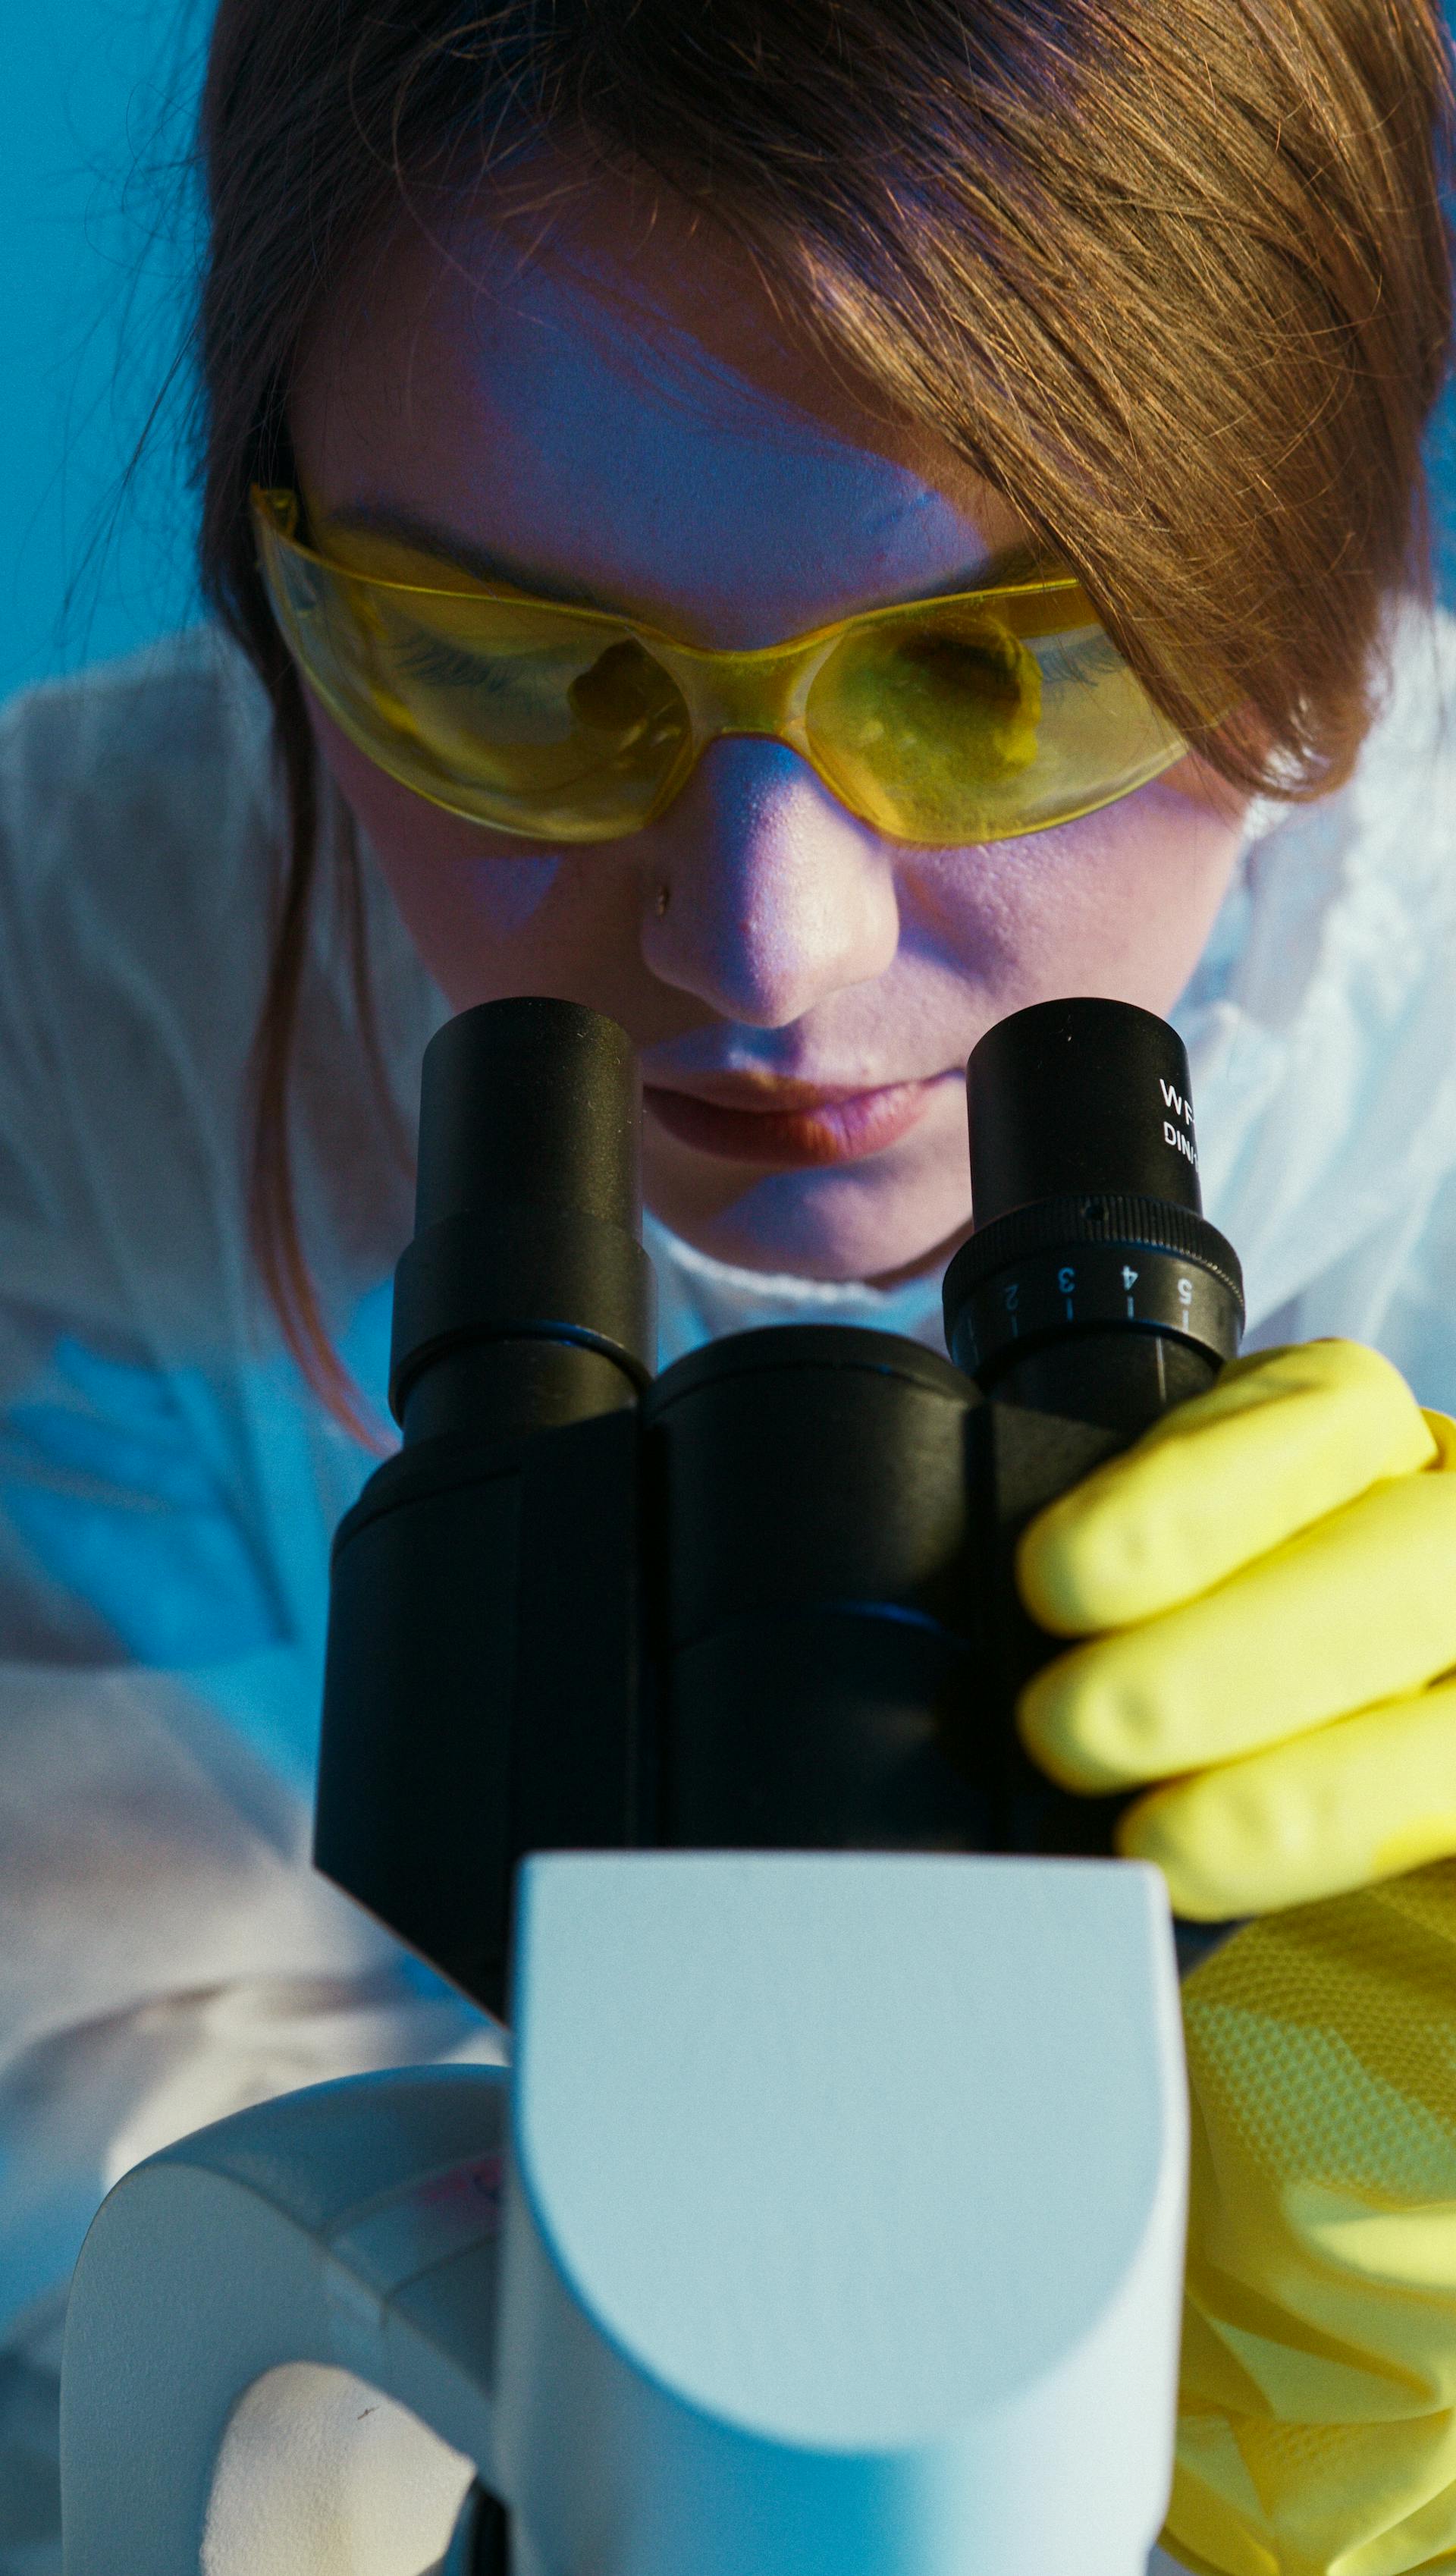 A woman looking through a microscope | Source: Pexels